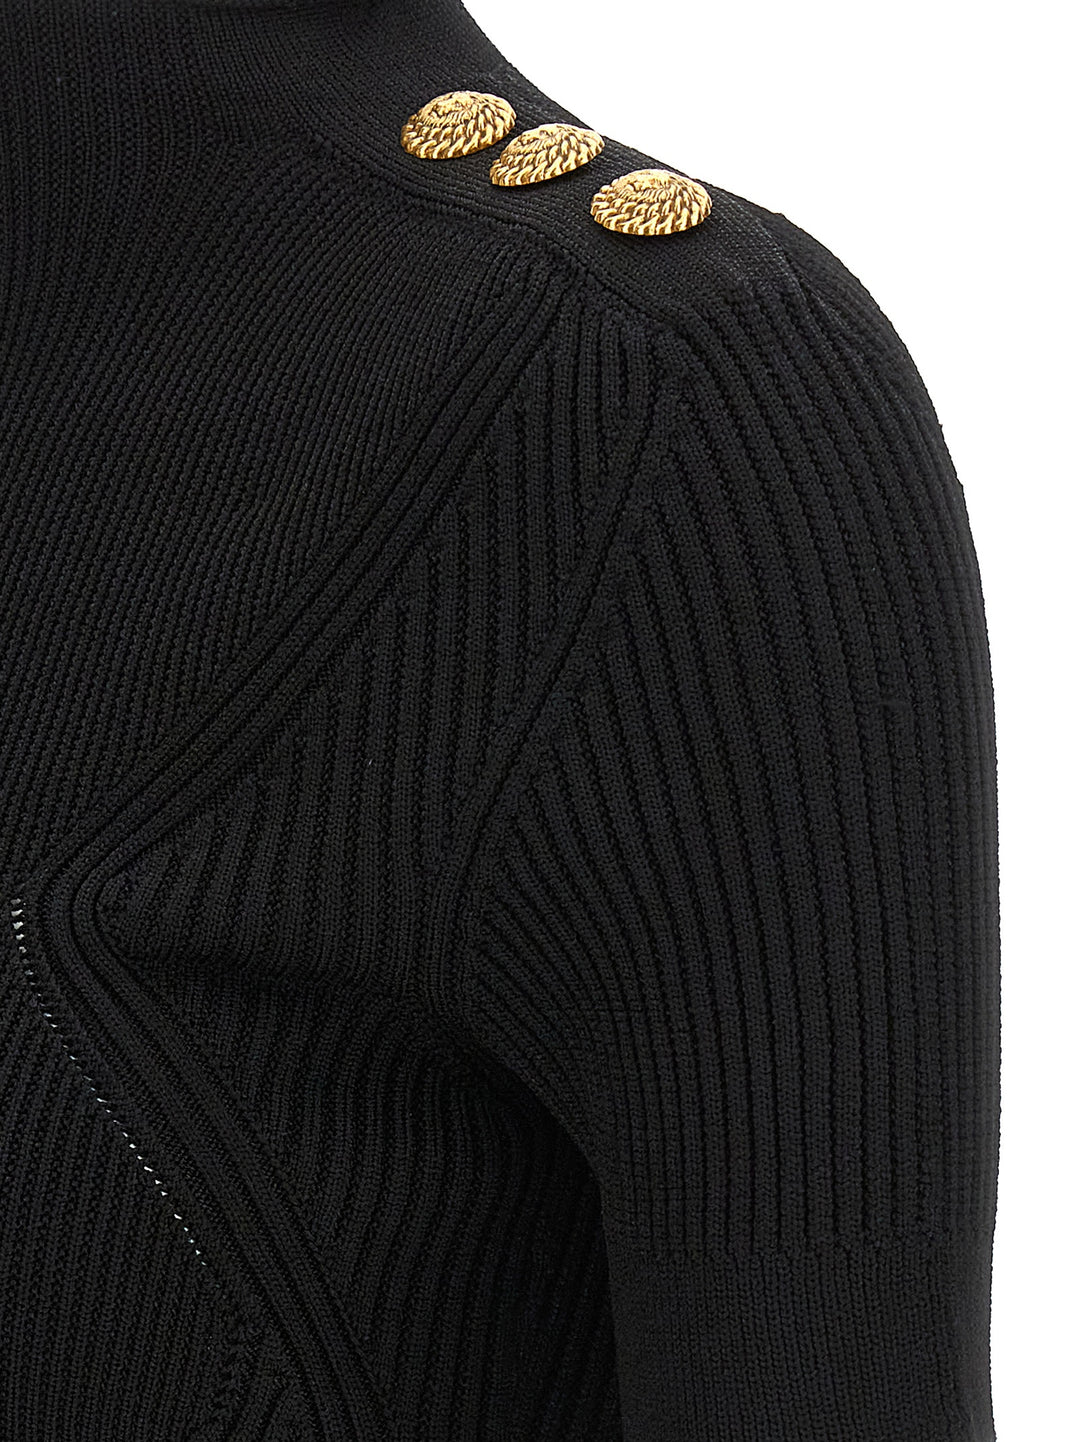 Ribbed Knit Top Top Nero